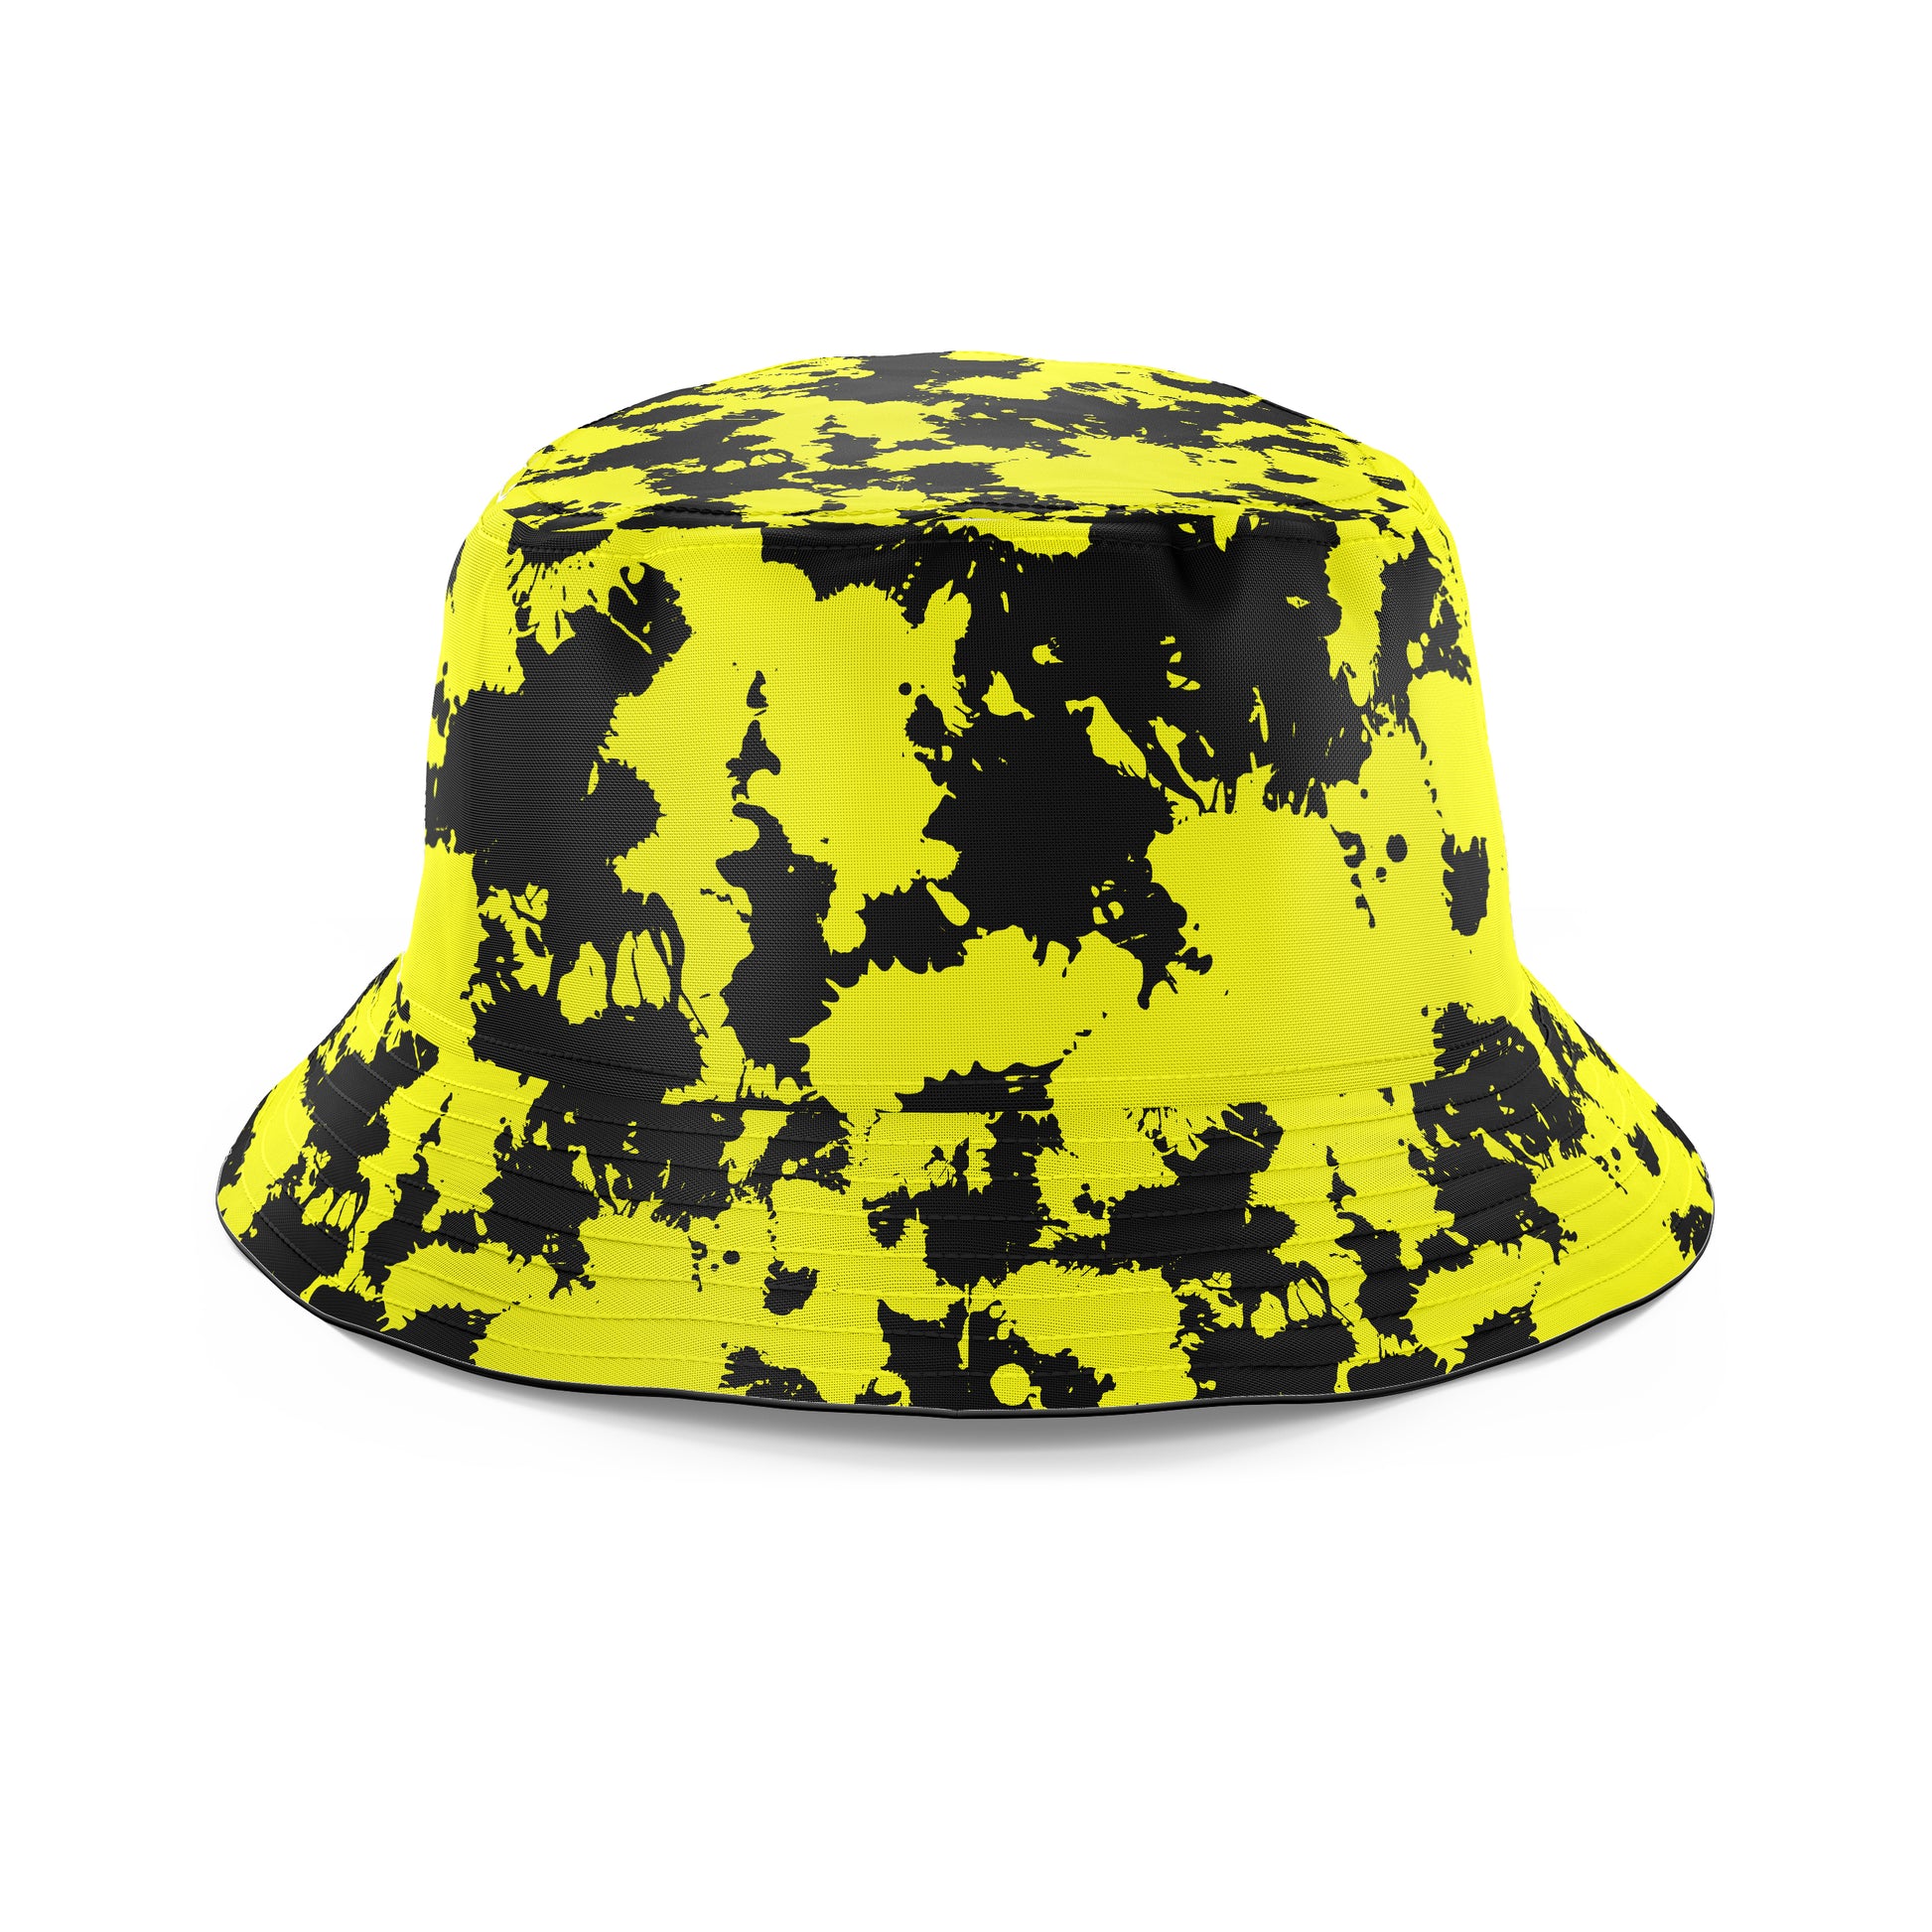 Yellow and Black Paint Splatter T-Shirt and Shorts with Bucket Hat Combo, Big Tex Funkadelic, | iEDM